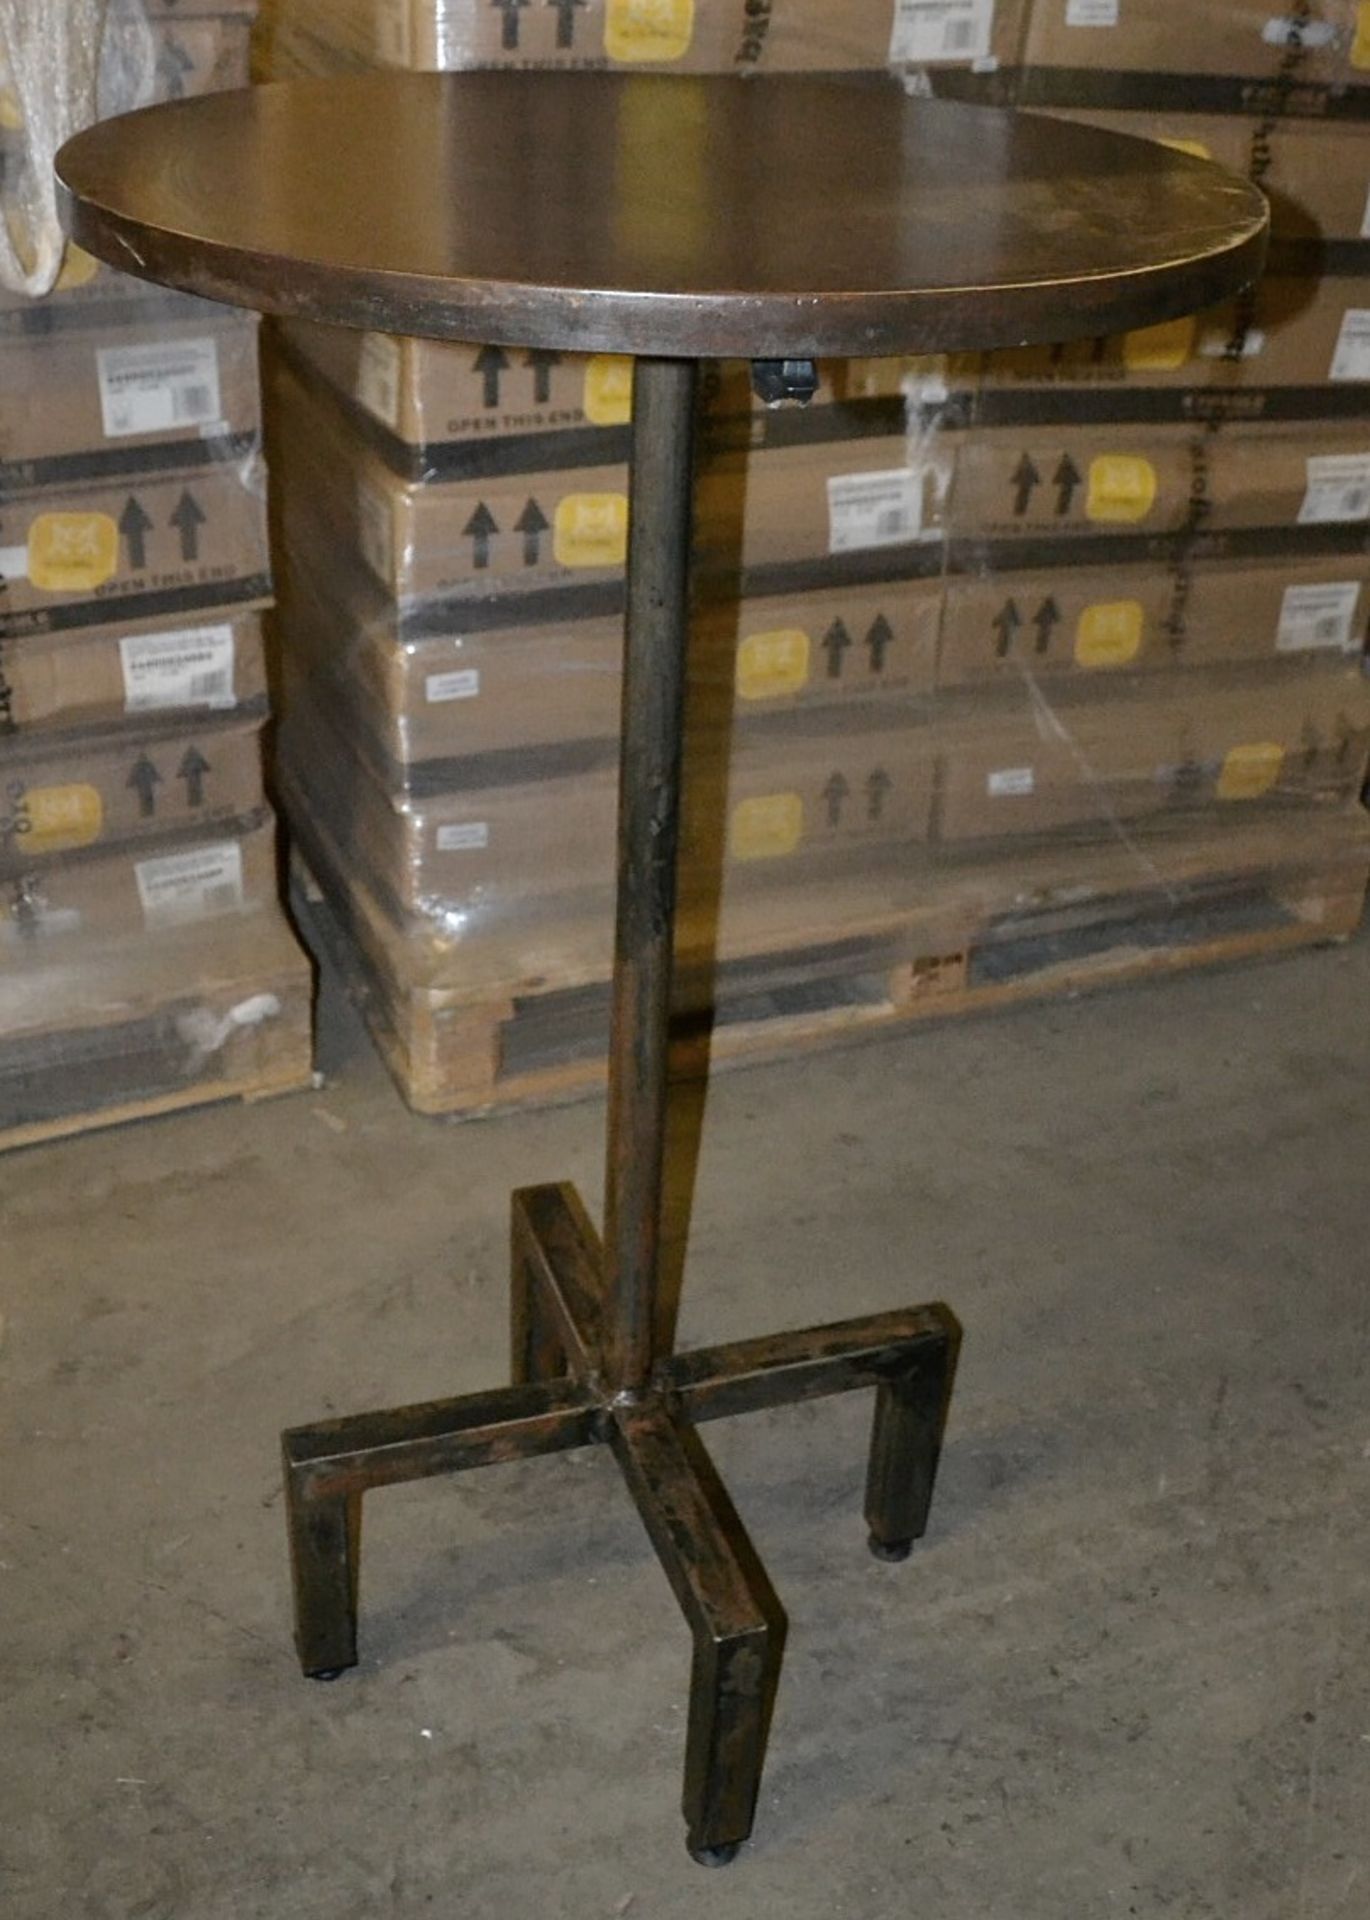 1 x Industrial Style Poser Table Featuring A Metal Plated Top, Welded Criss-Cross Base, All With An